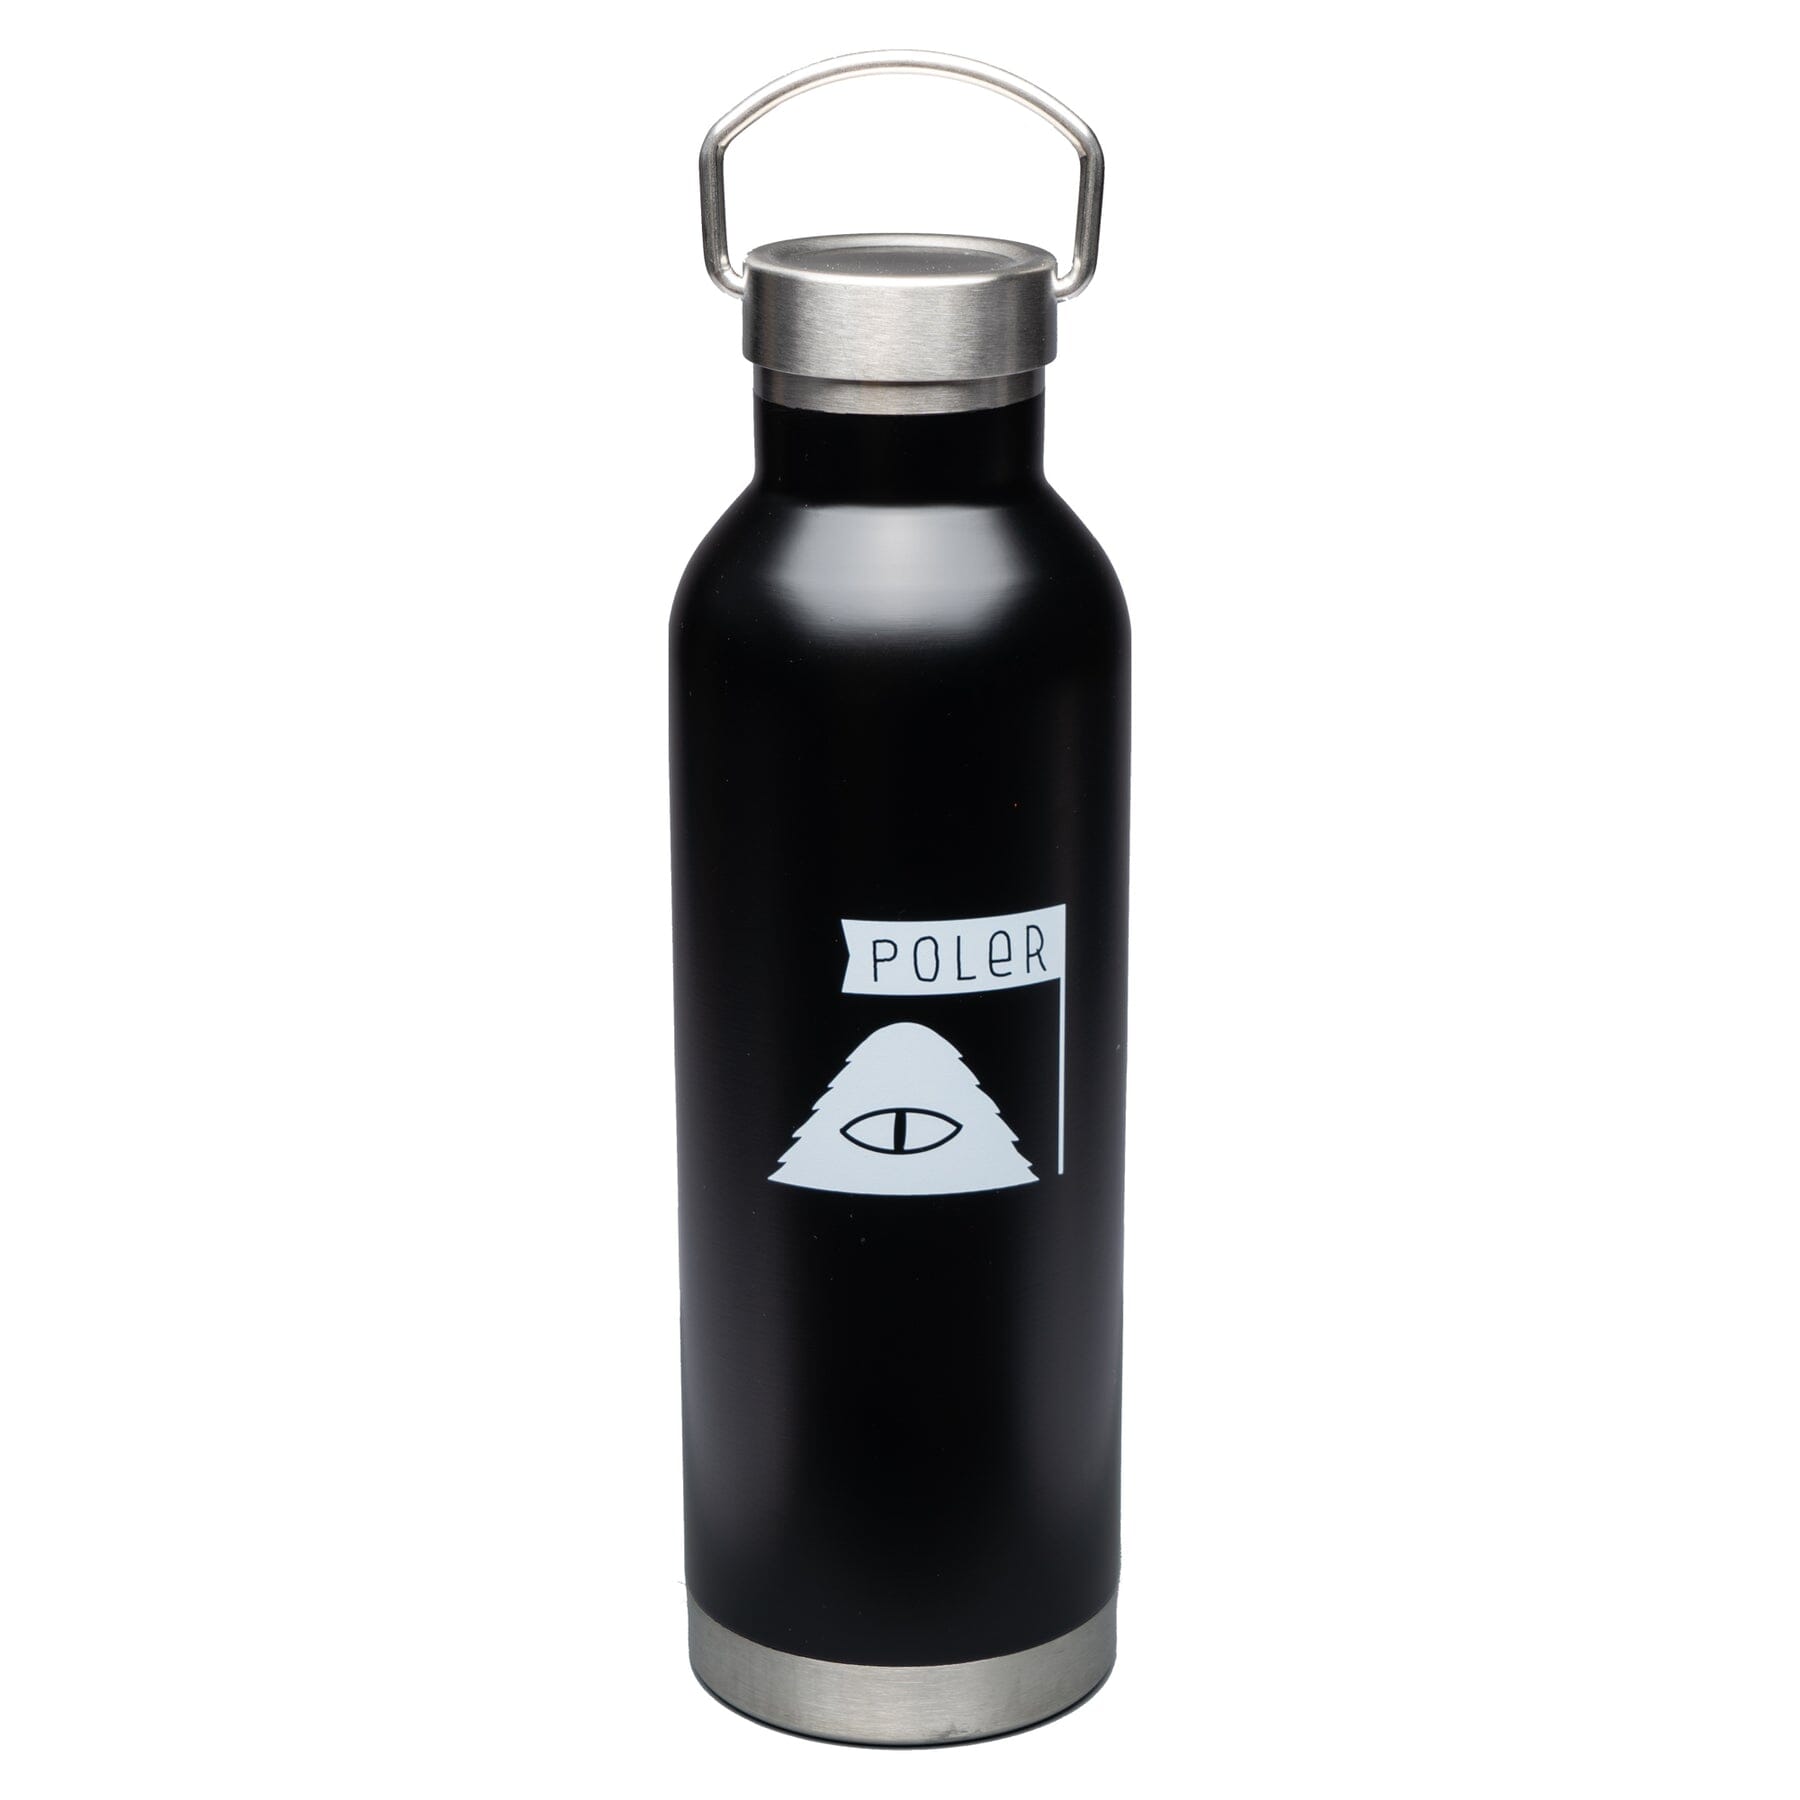 Poler Insulated Water Bottle Fossil Fuel accessories Poler 